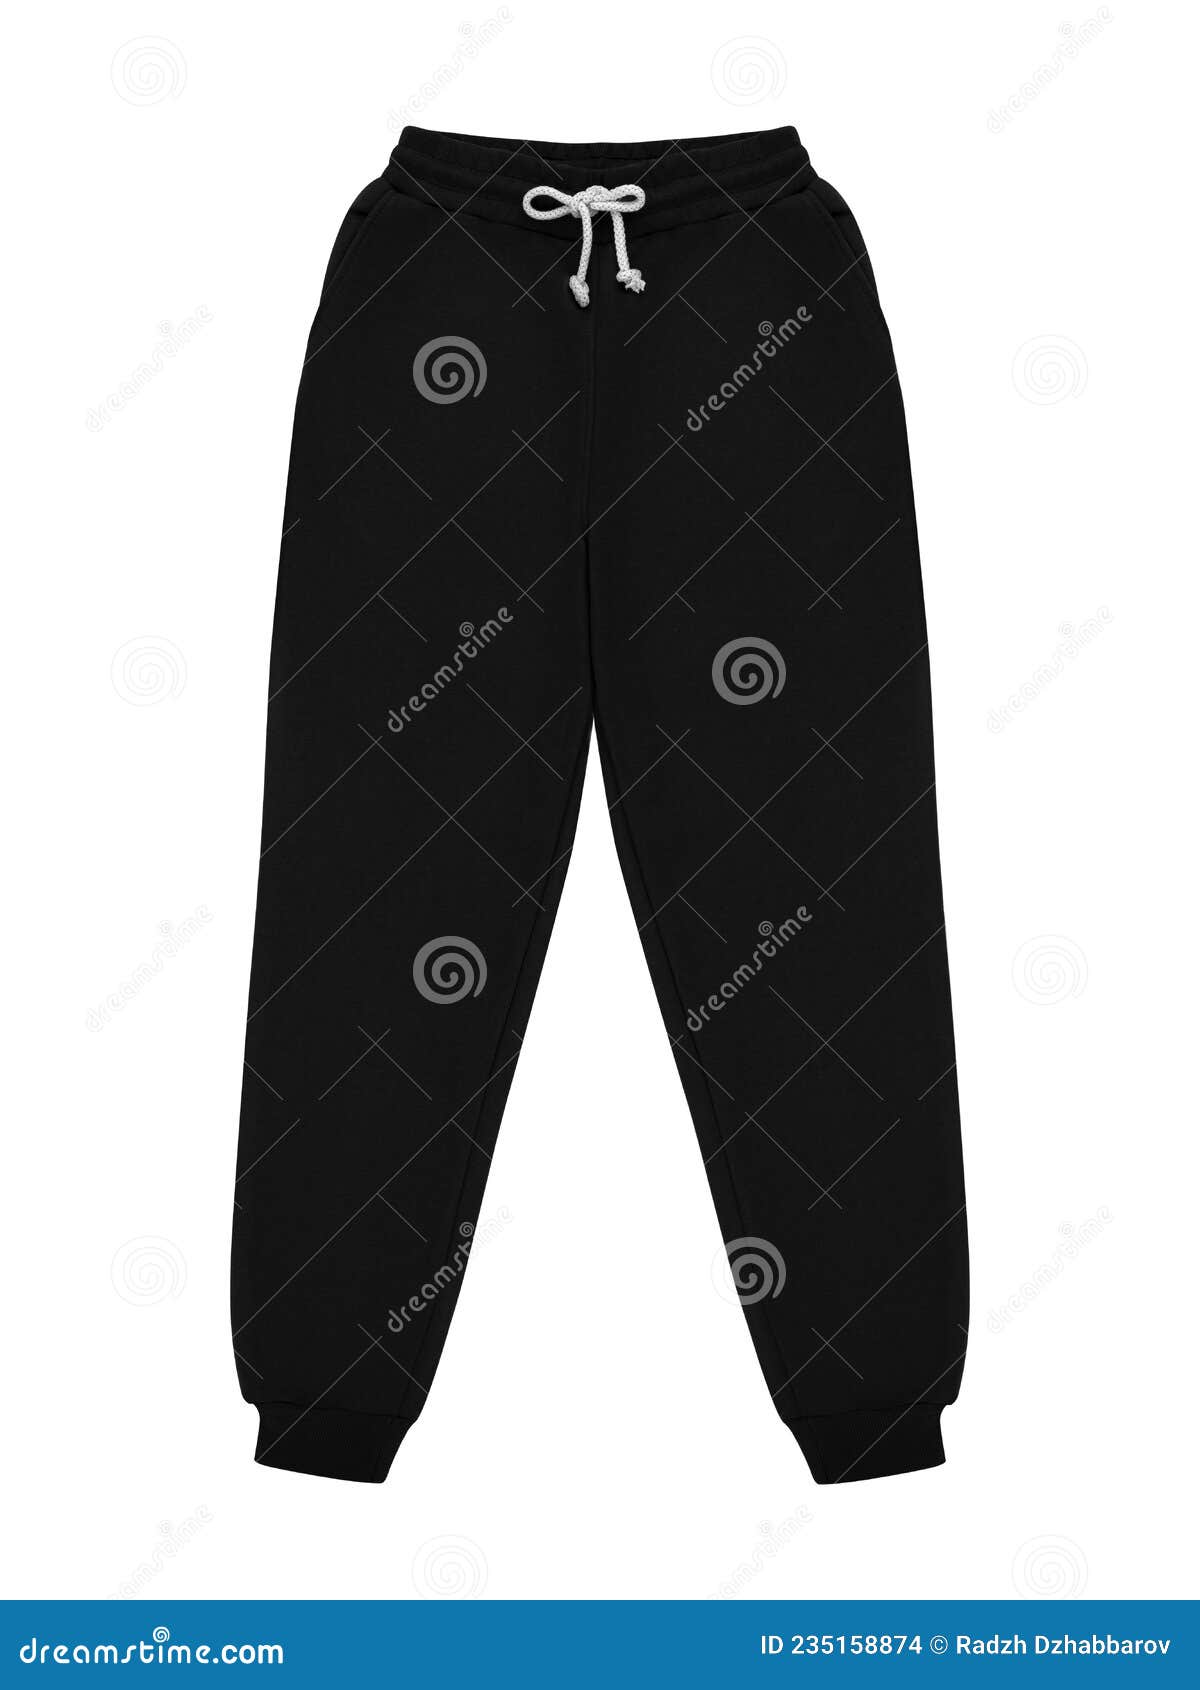 Black Jogger Pants Mockup. Template Sports Trousers Front View for ...